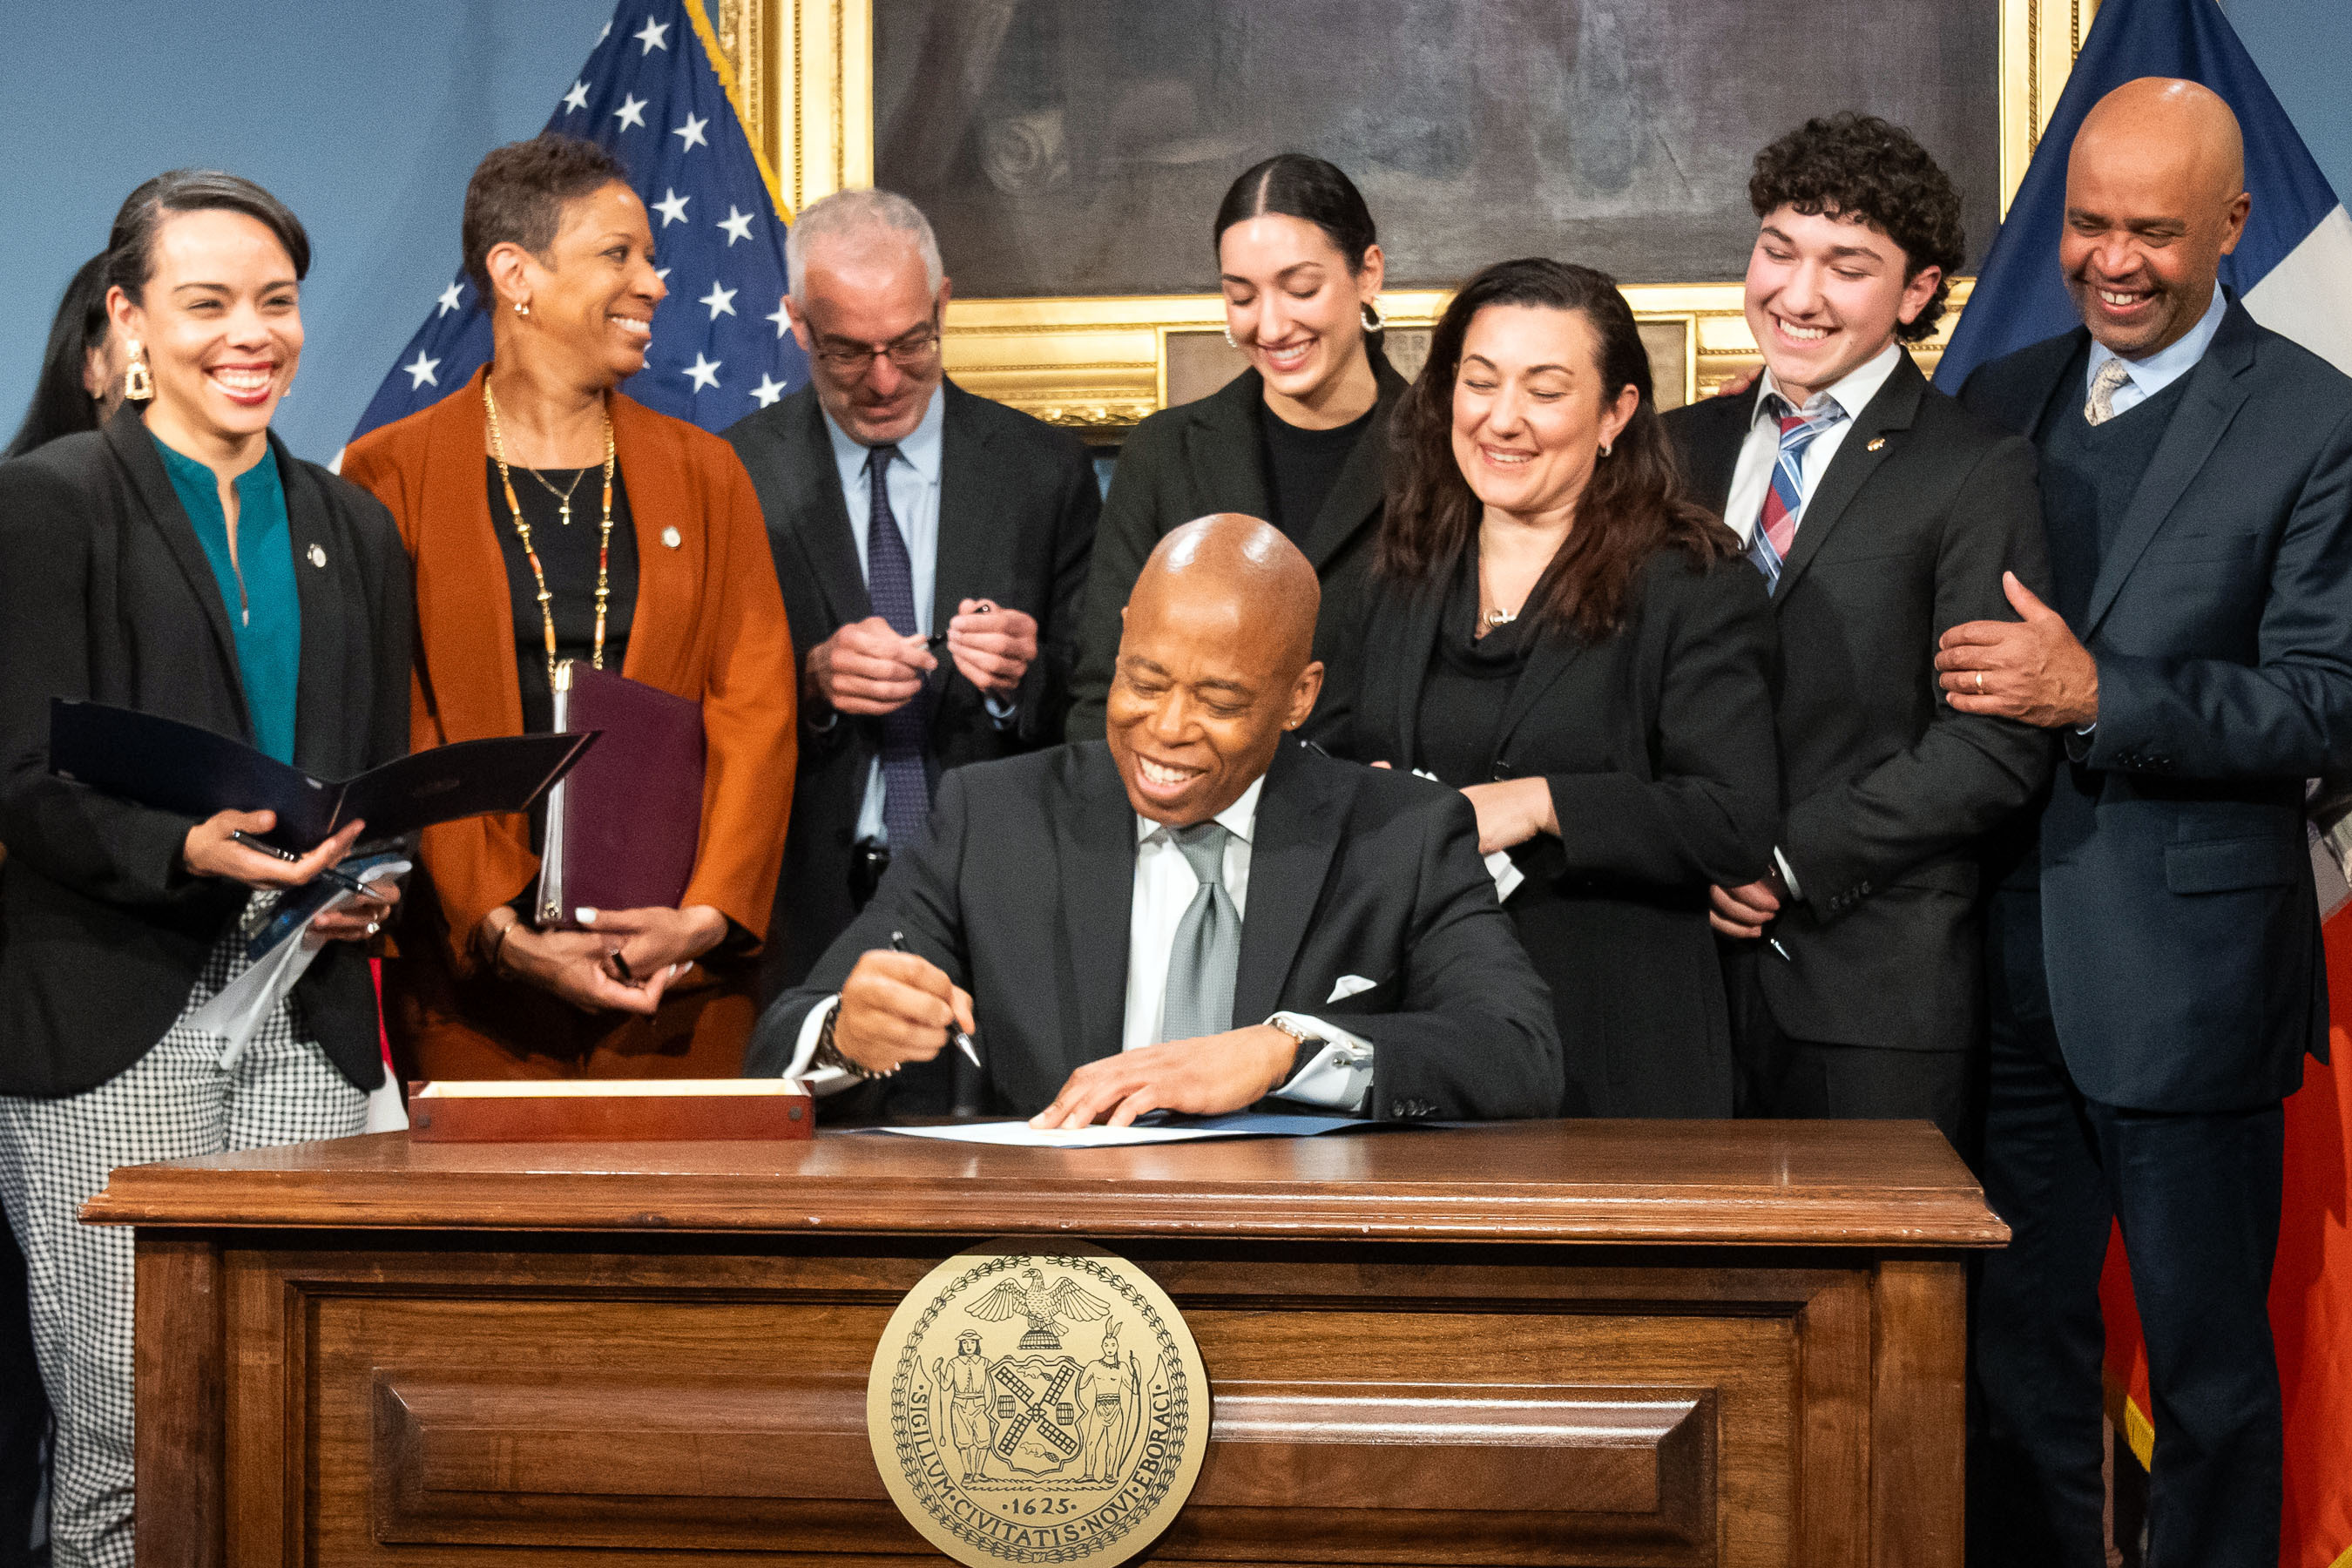 Mayor Adams Signs Two Pieces Of Legislation, Extending City’s Rent Stabilization Laws, Honoring Late Public Servant Paul Vallone